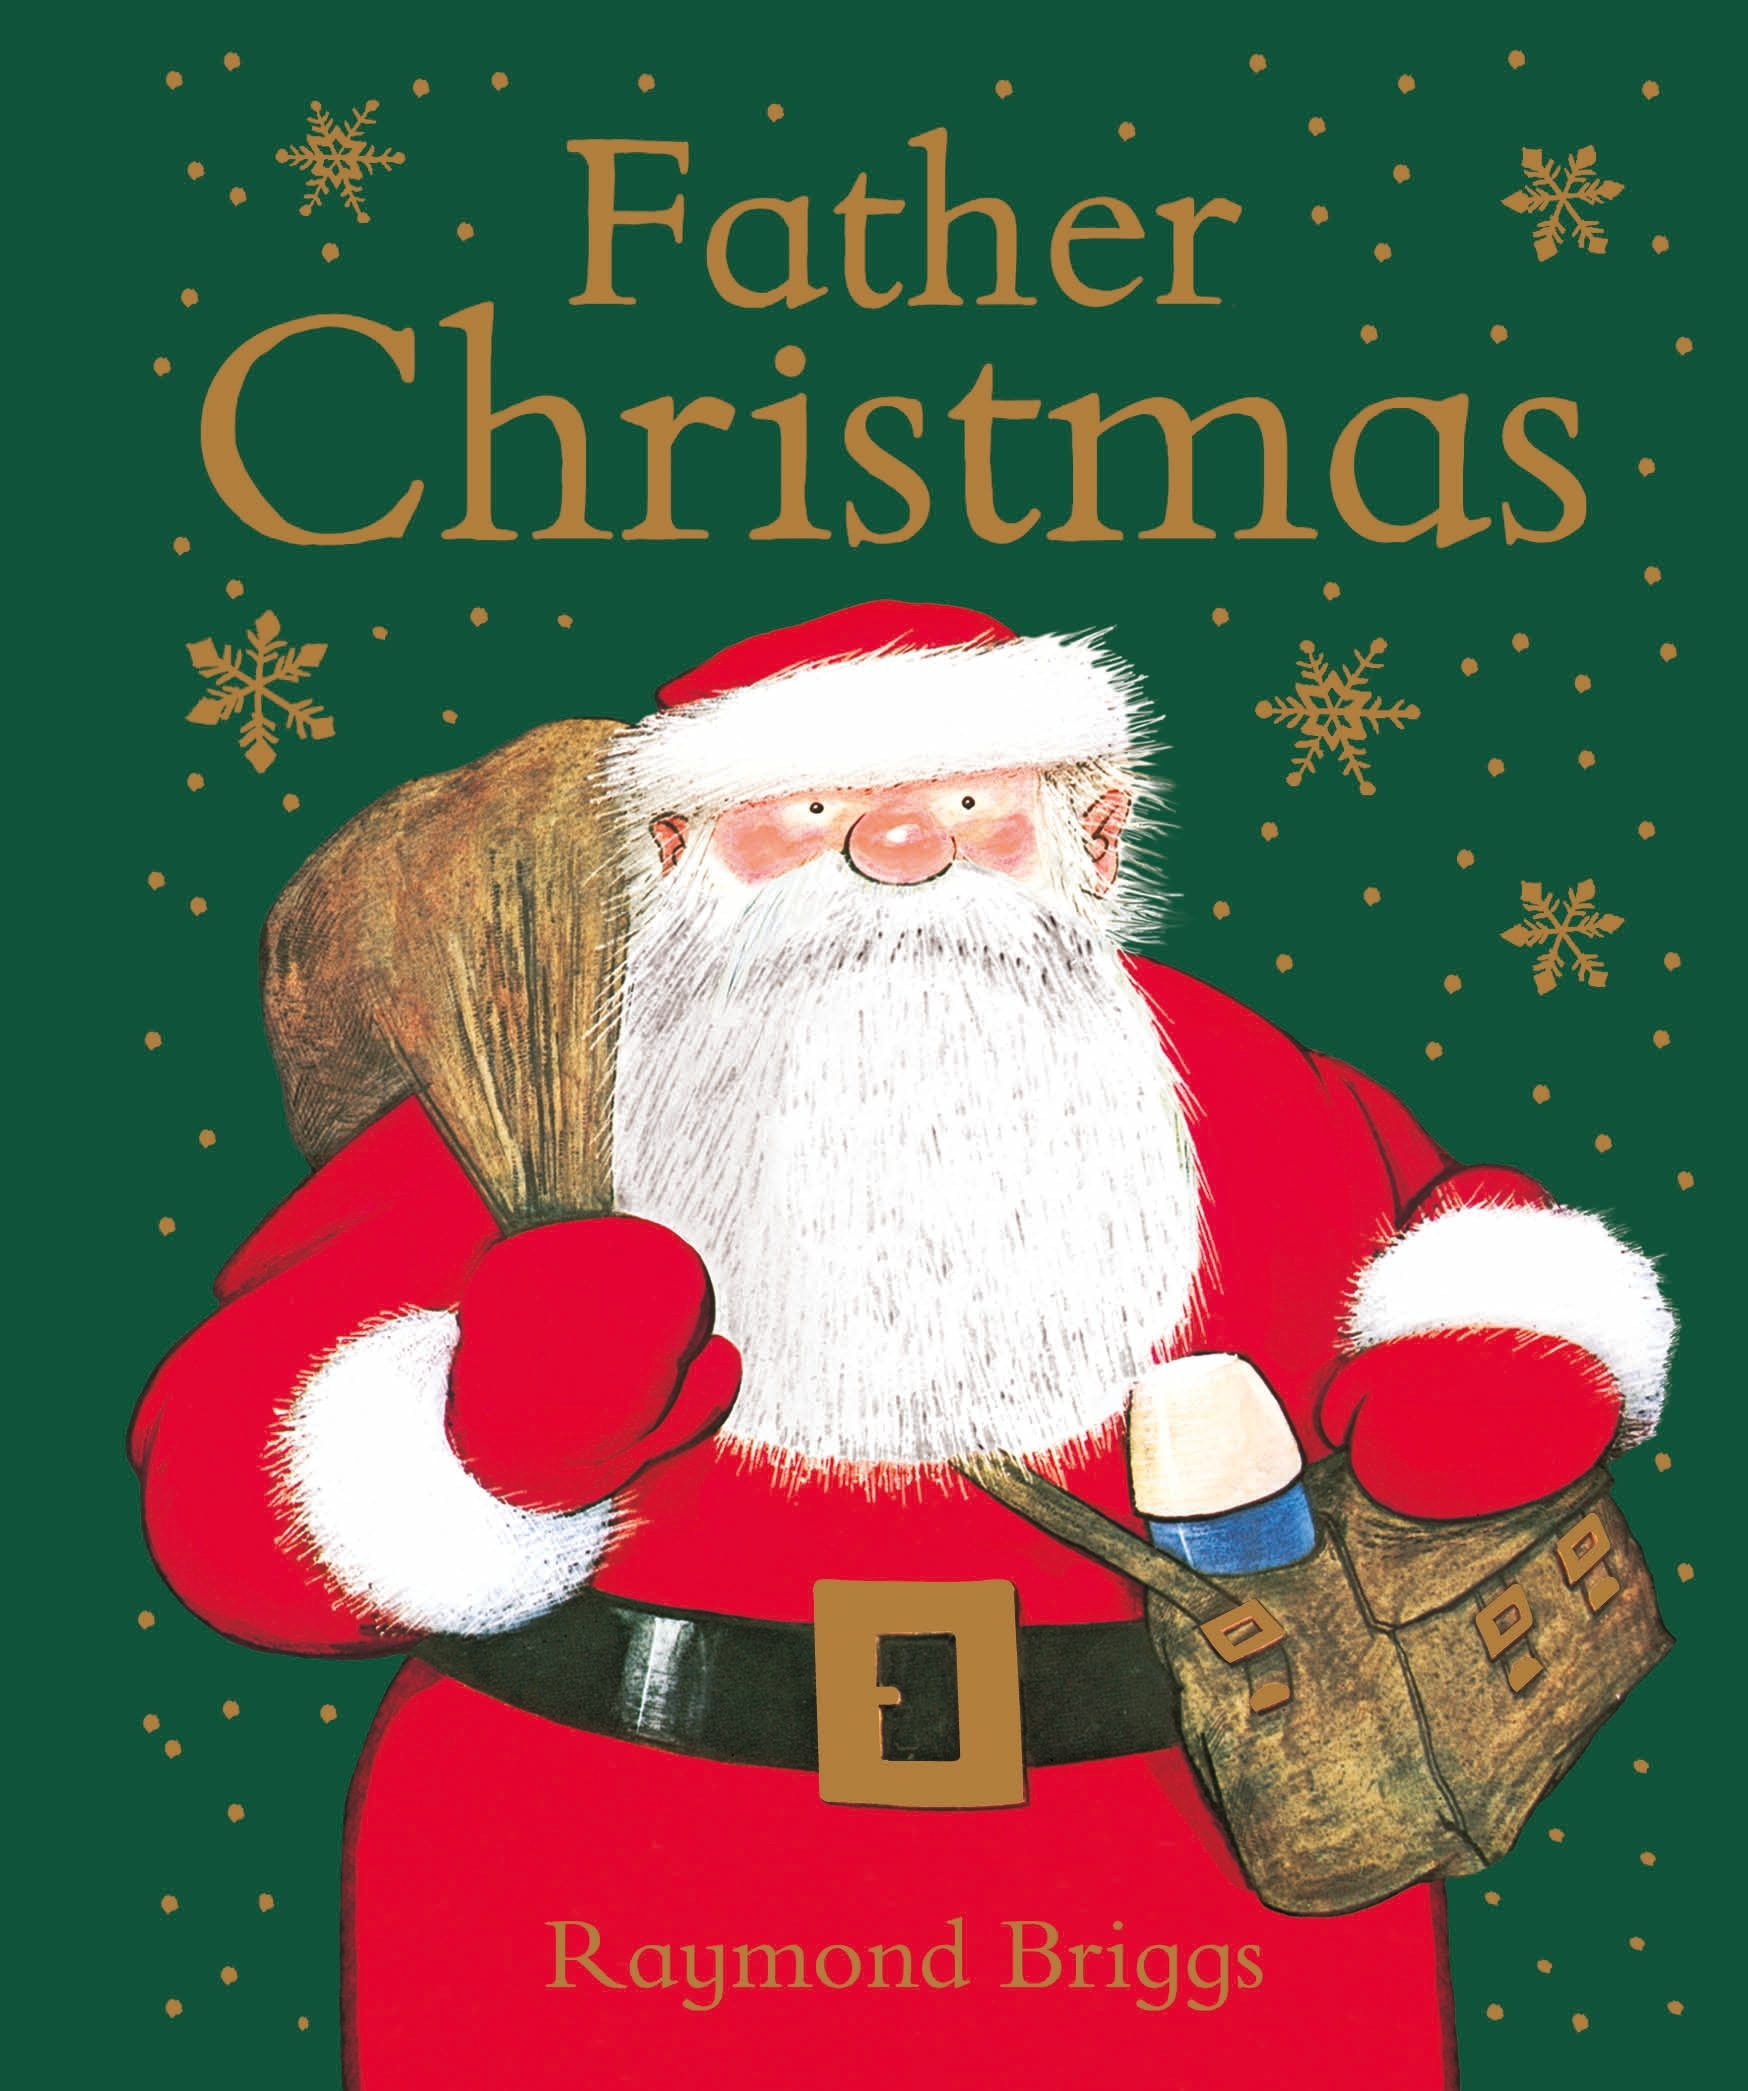 Book “Father Christmas” by Raymond Briggs — October 18, 2018